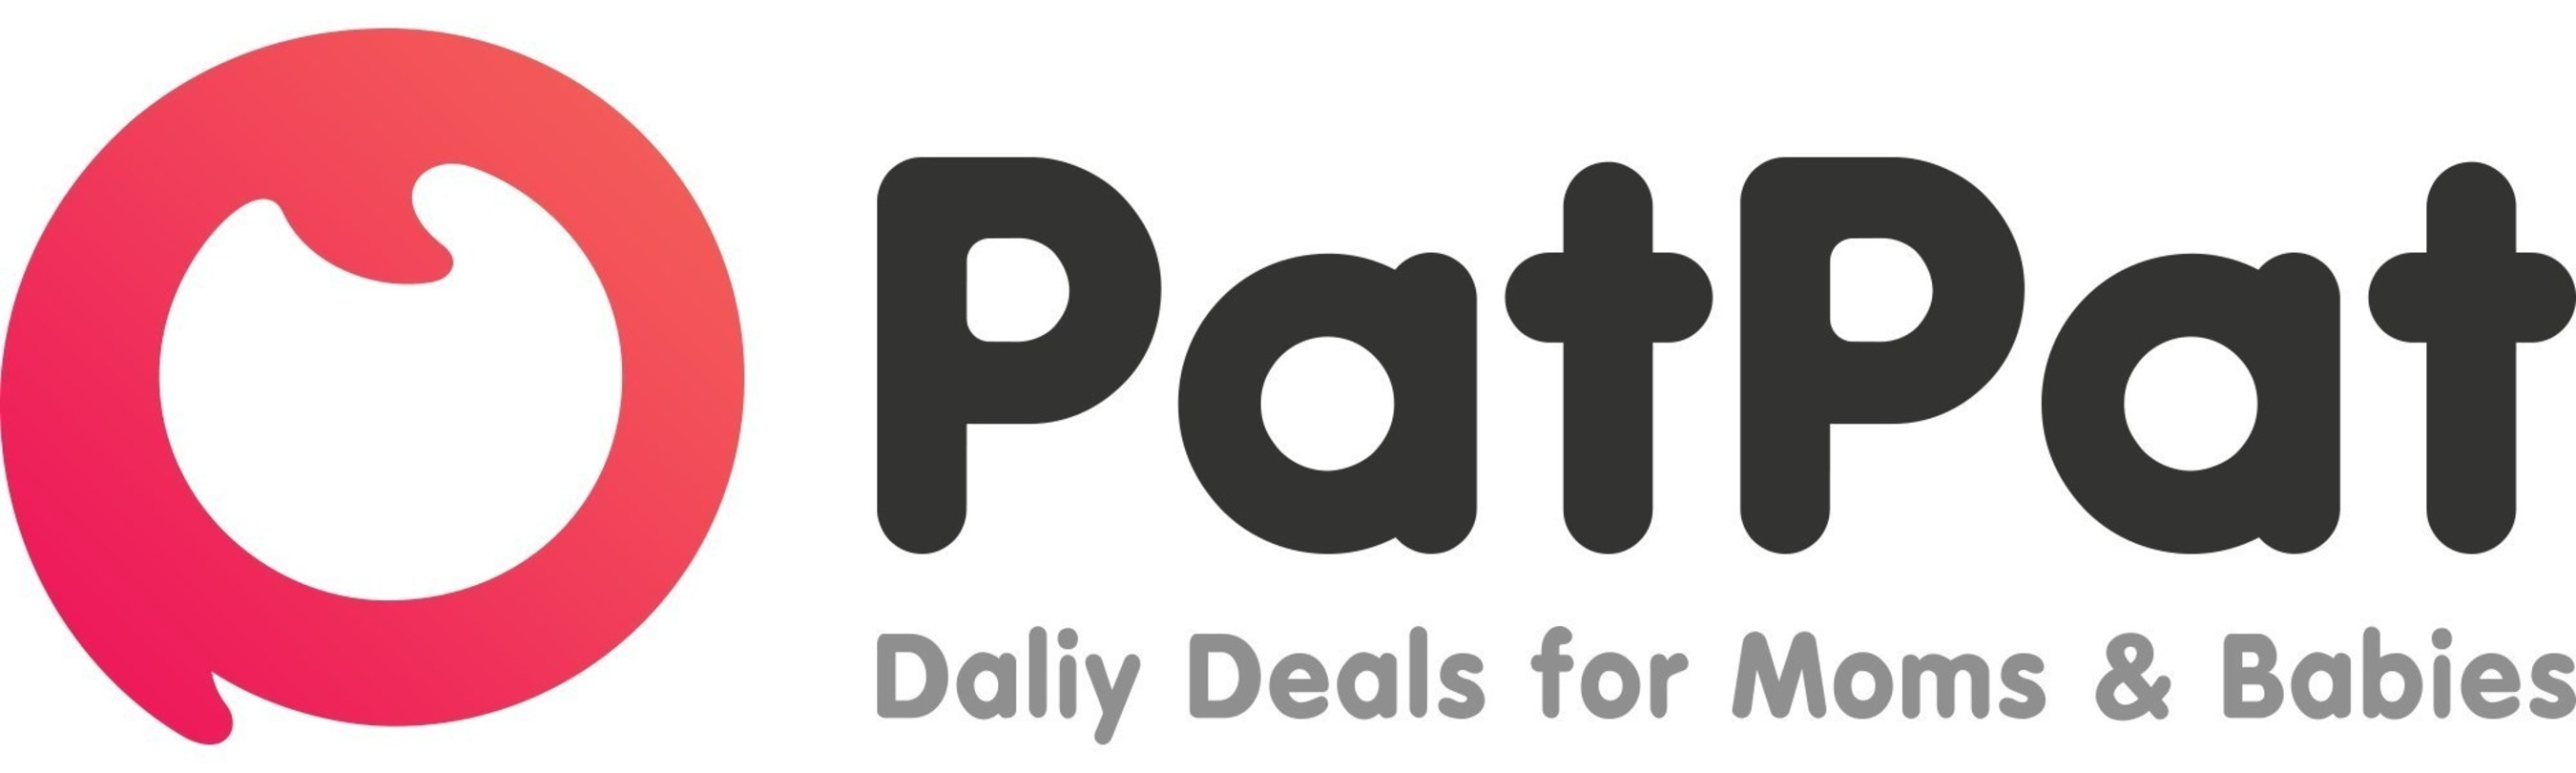 Concession upper Kangaroo The E-Commerce Motherload: New PatPat App Gives Moms High Quality at a Low  Price